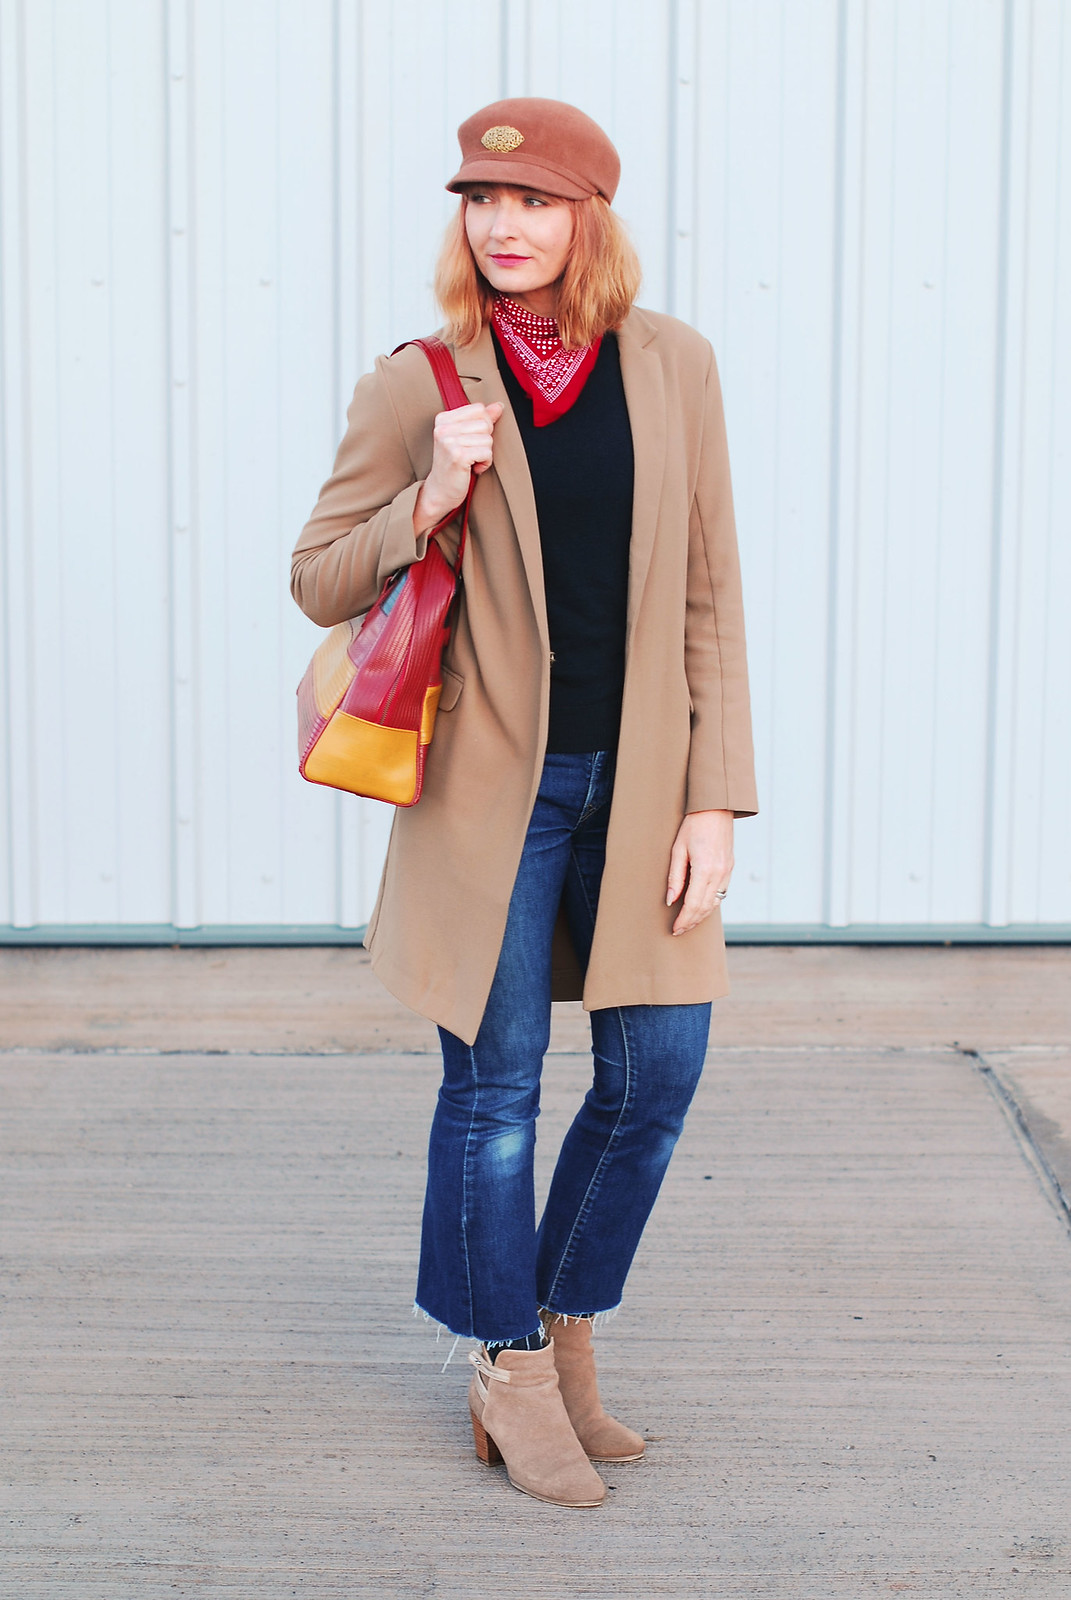 How to style a longline camel blazer for autumn/fall: Cropped flared jeans, suede ankle boots, vintage baker boy hat and neck scarf | Not Dressed As Lamb, over 40 style